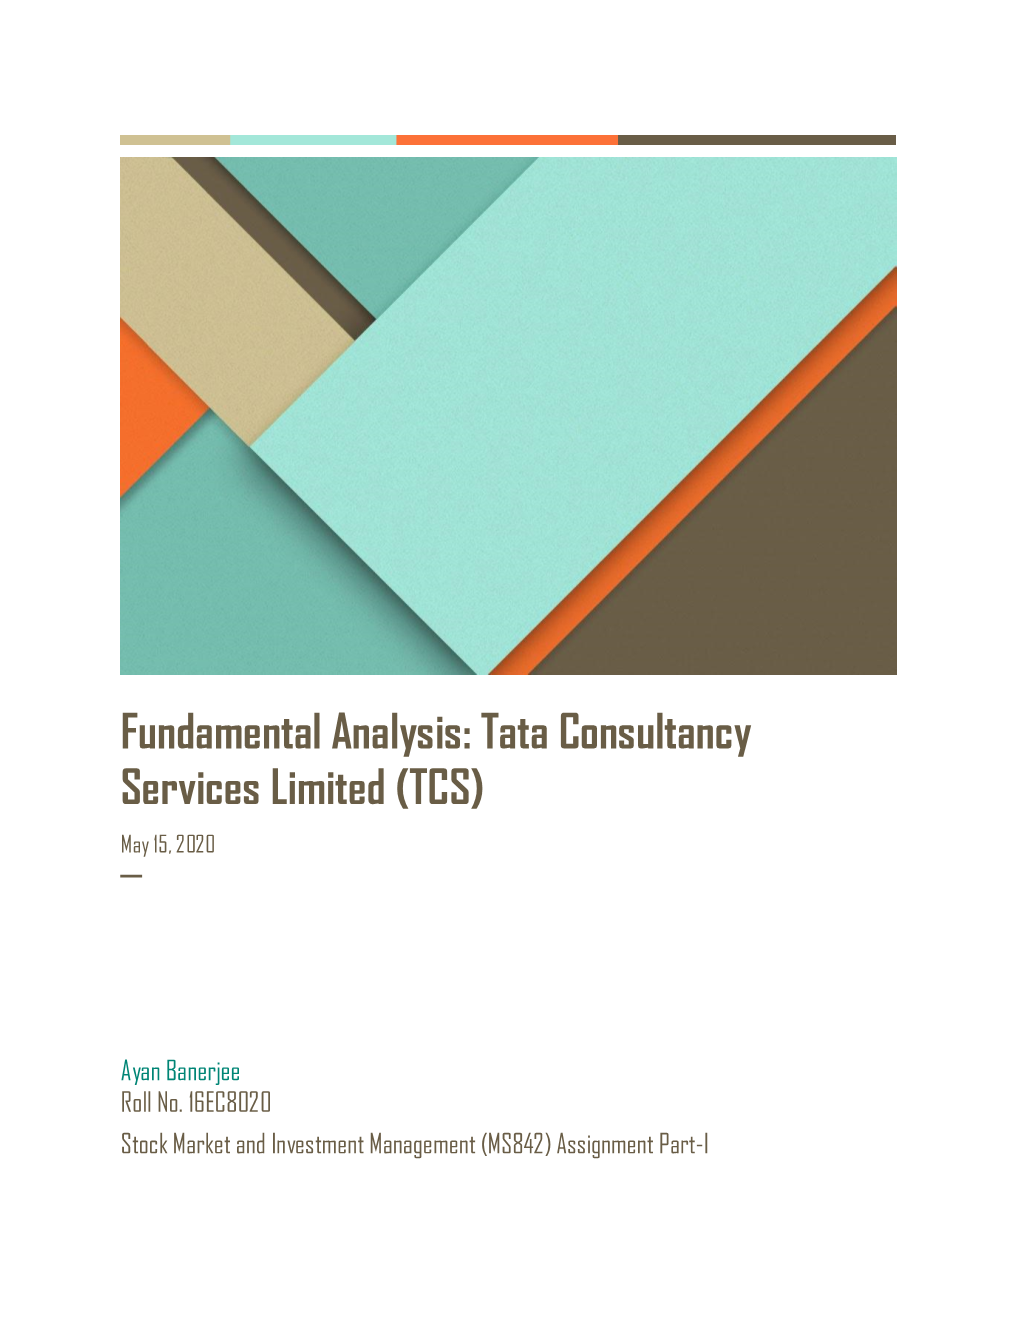 Fundamental Analysis: Tata Consultancy Services Limited (TCS)